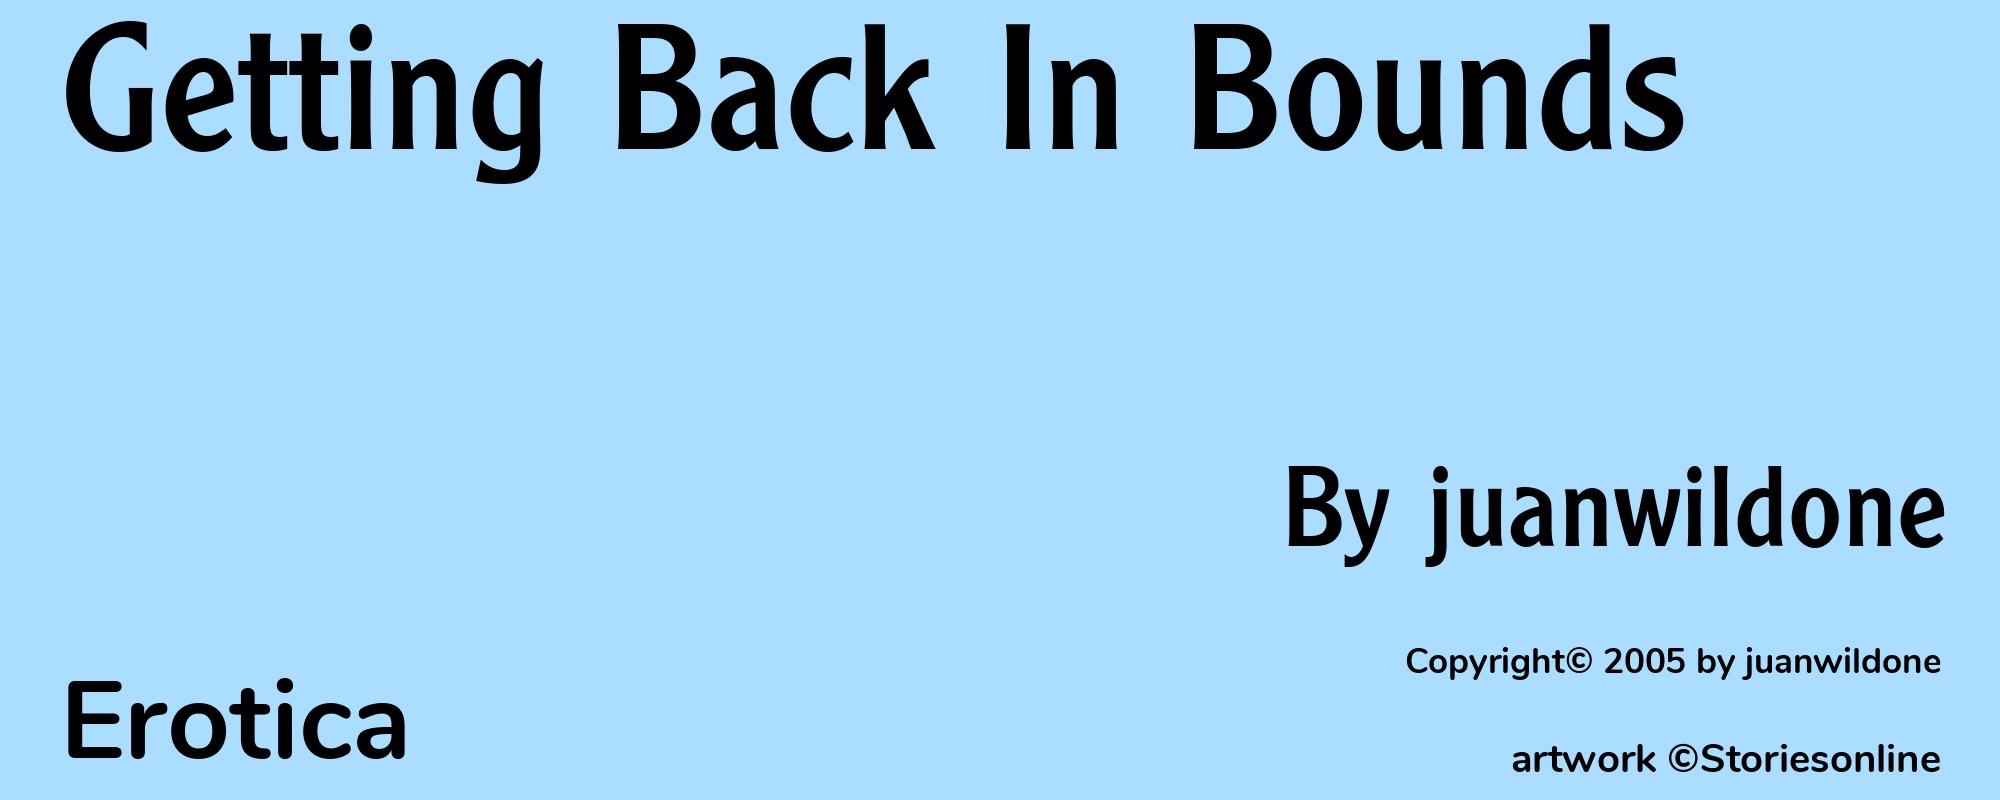 Getting Back In Bounds - Cover